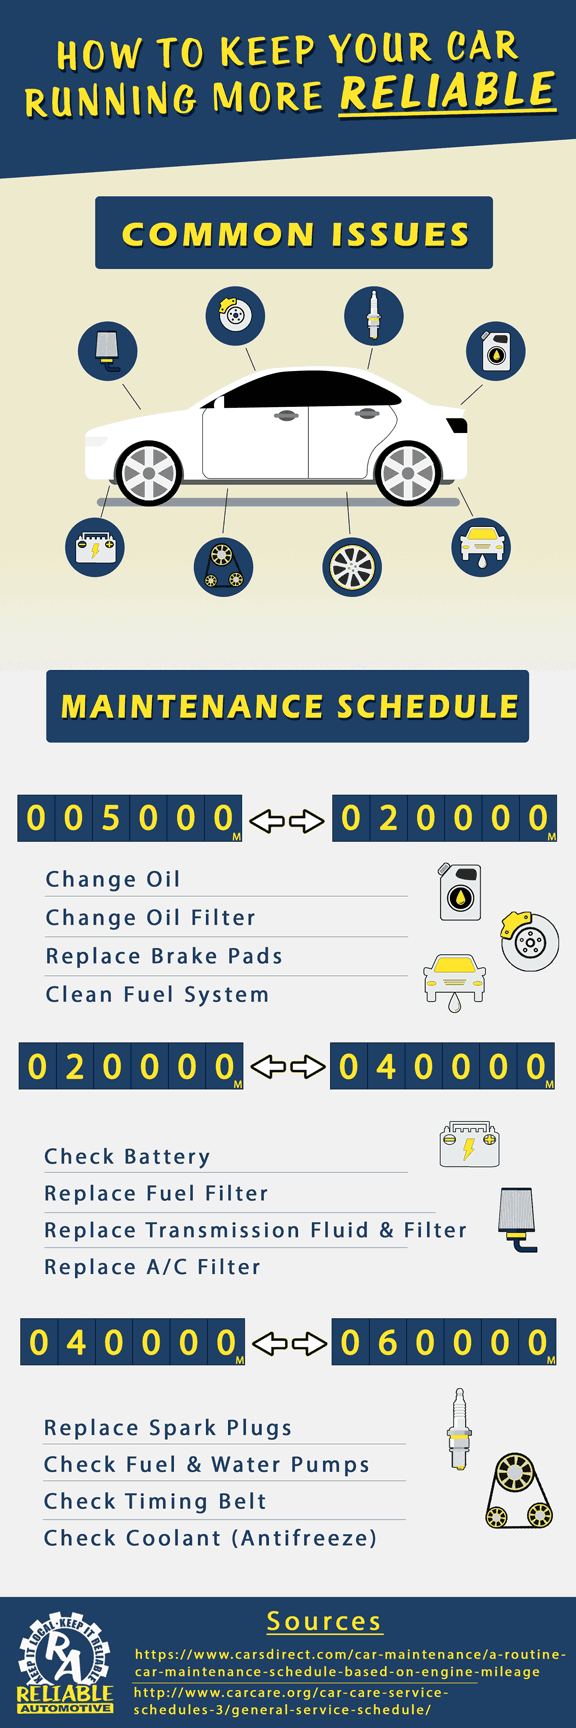 An infographic detailing a suggested maintenance schedule for the first 60,000 miles of a vehicle's life. Read below for the info in text form.